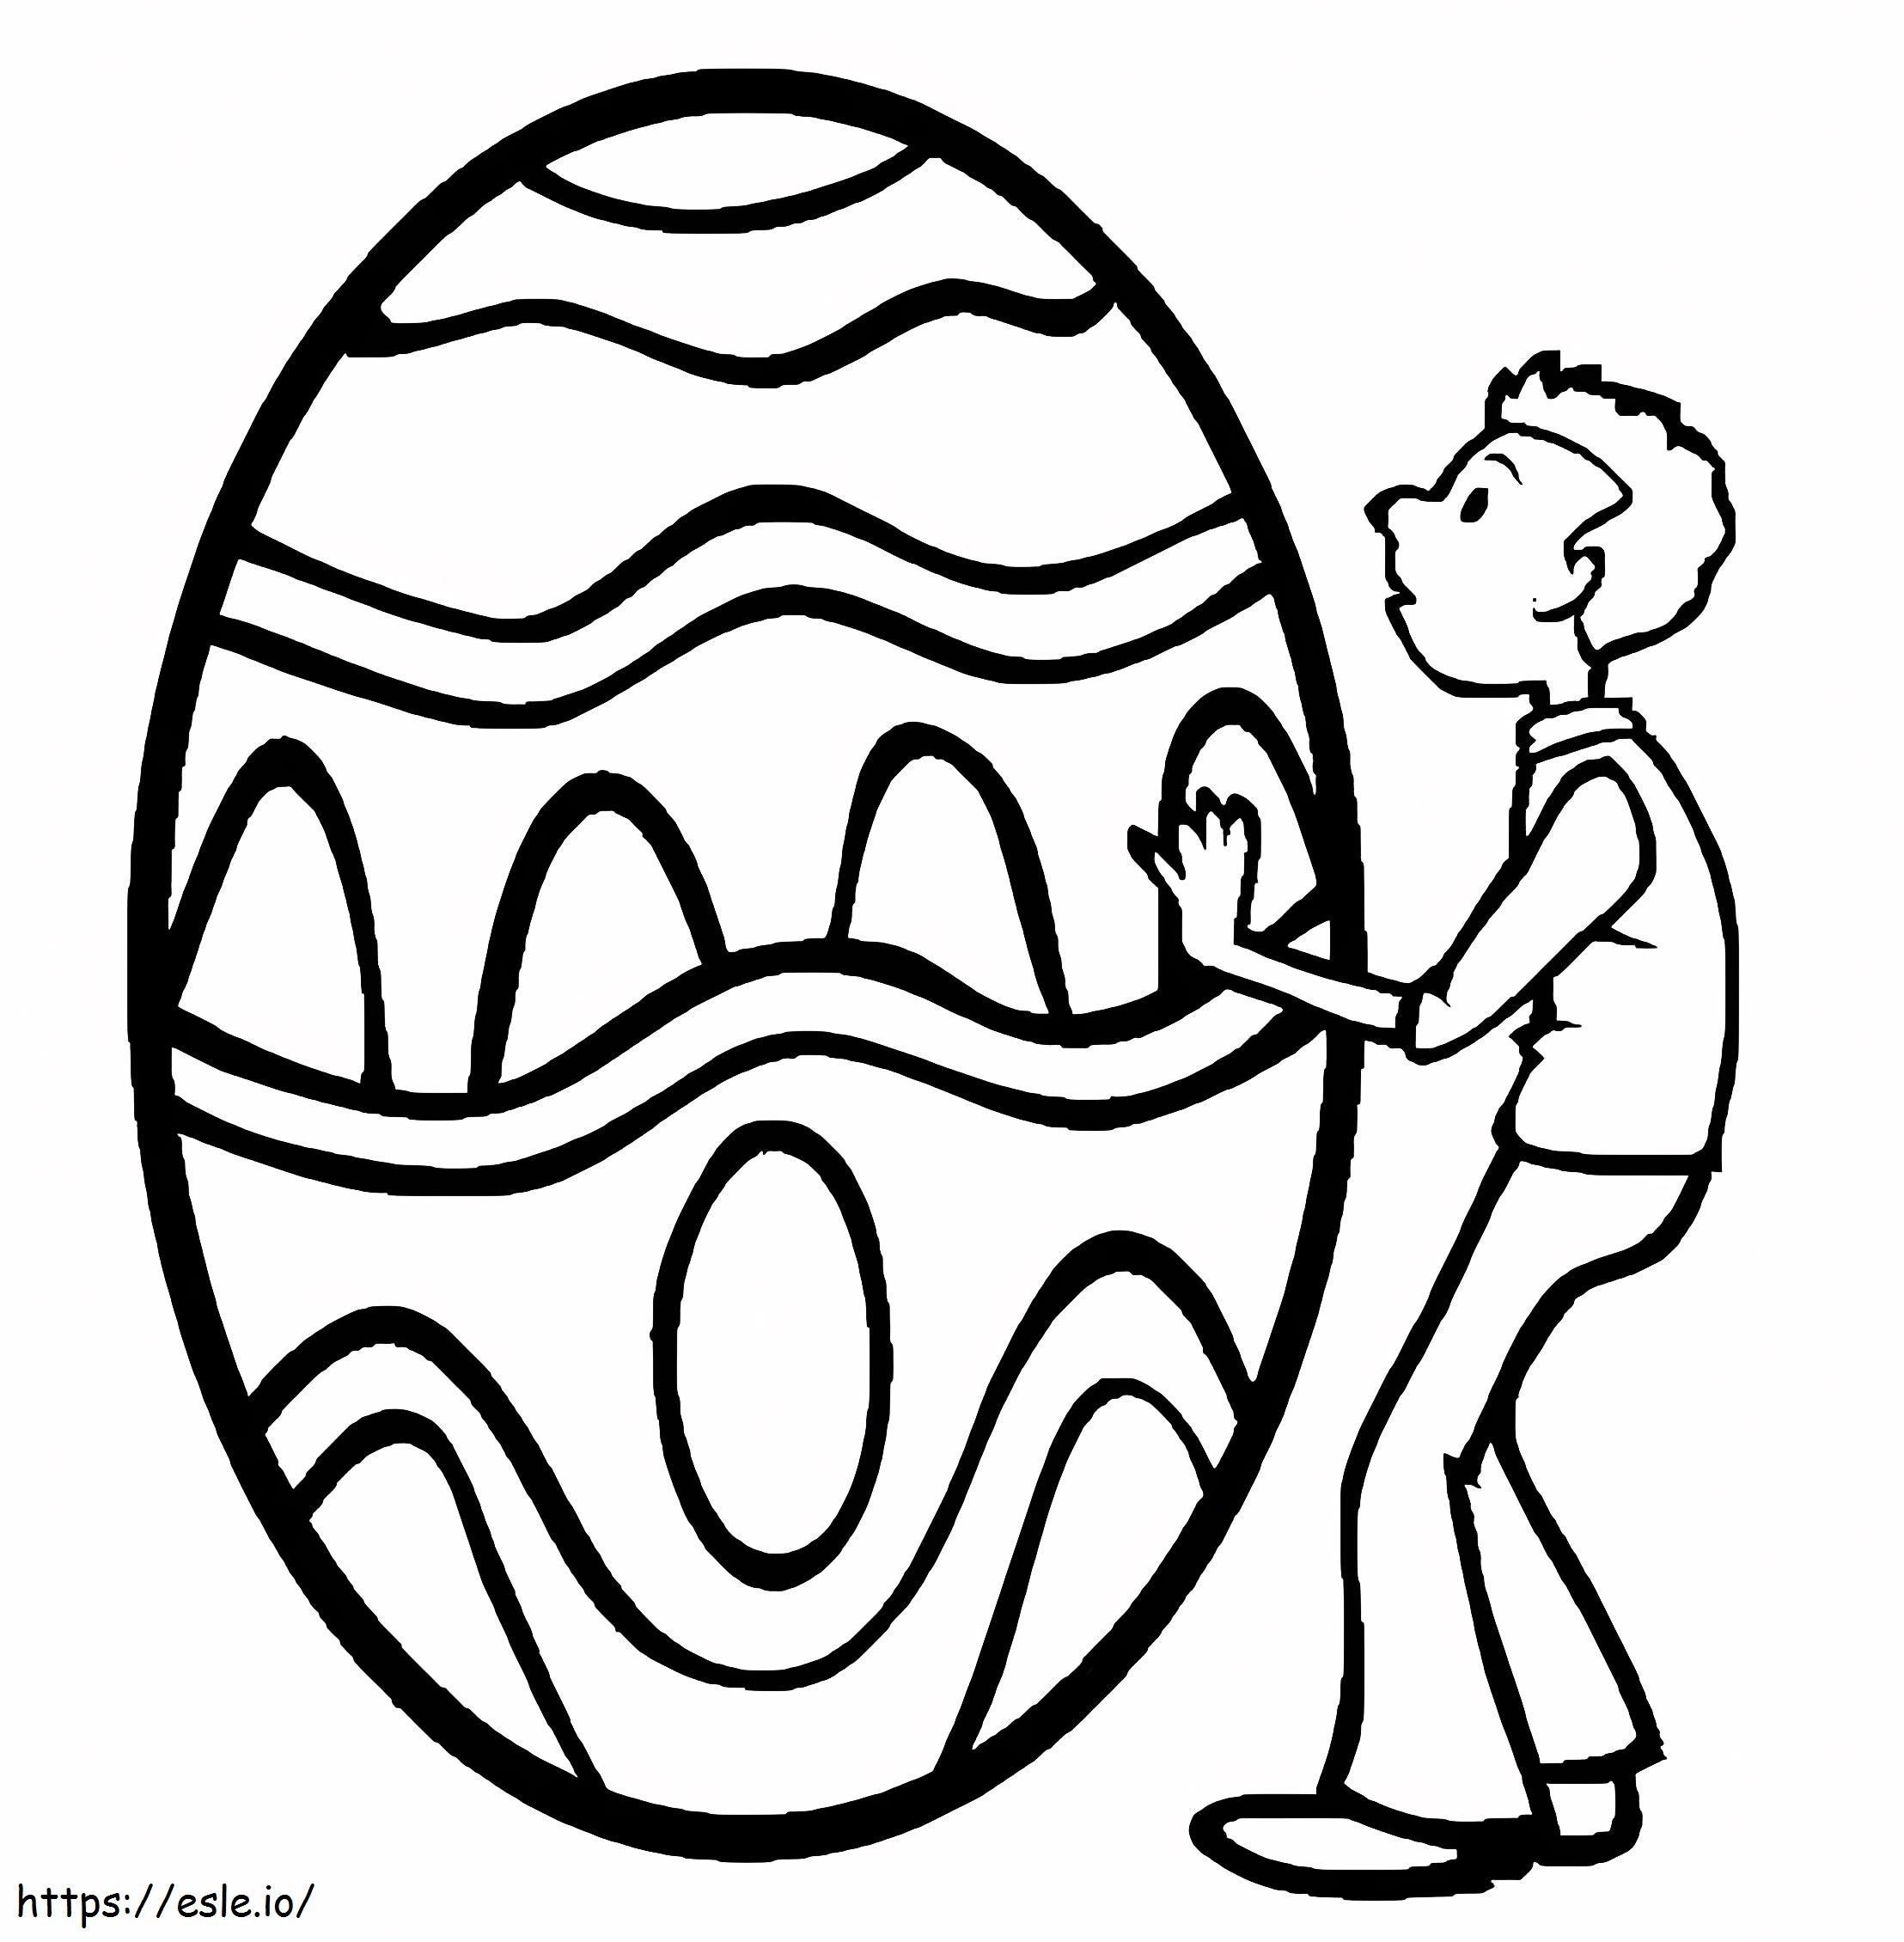 Child With Easter Egg coloring page